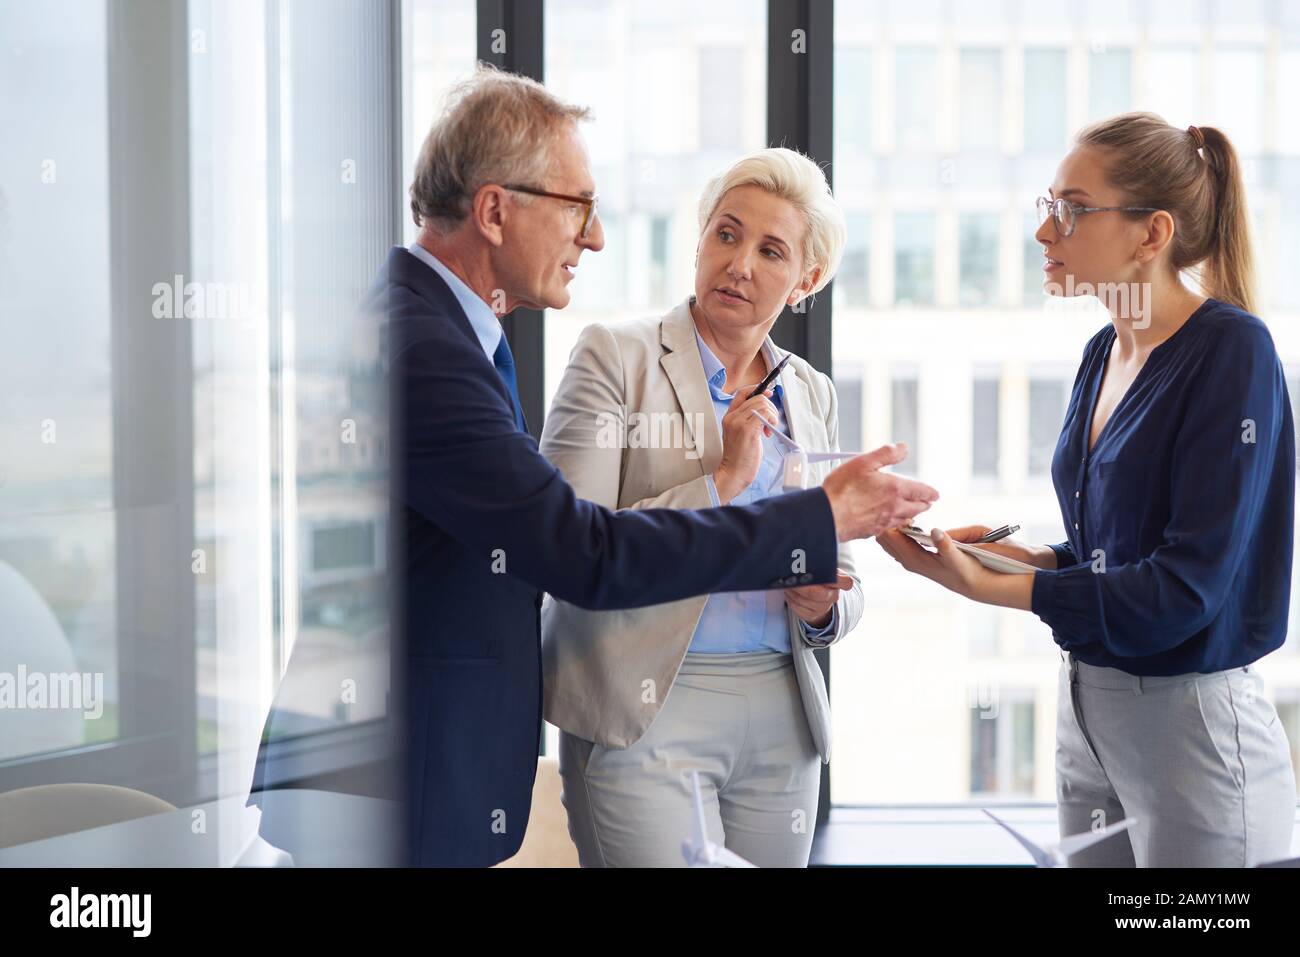 Confident leader convincing about his opinion Stock Photo